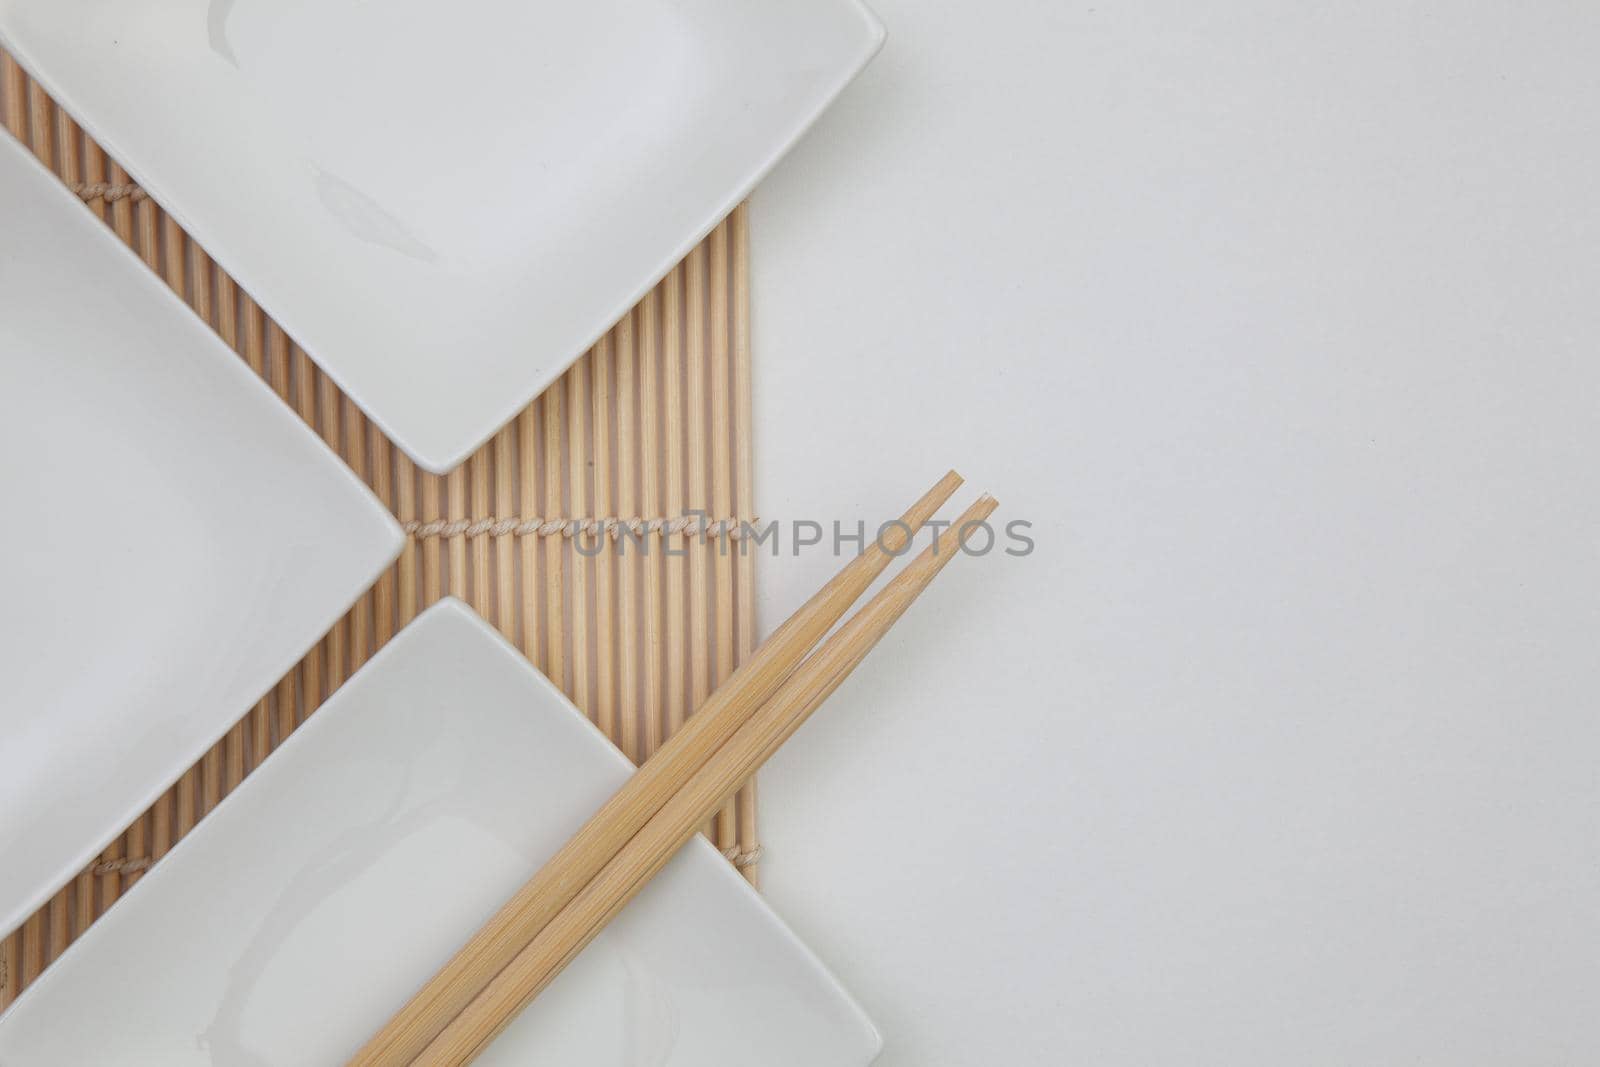 Top View Of White Empty Sushi Plates With Bamboo Chopsticks. Food Design